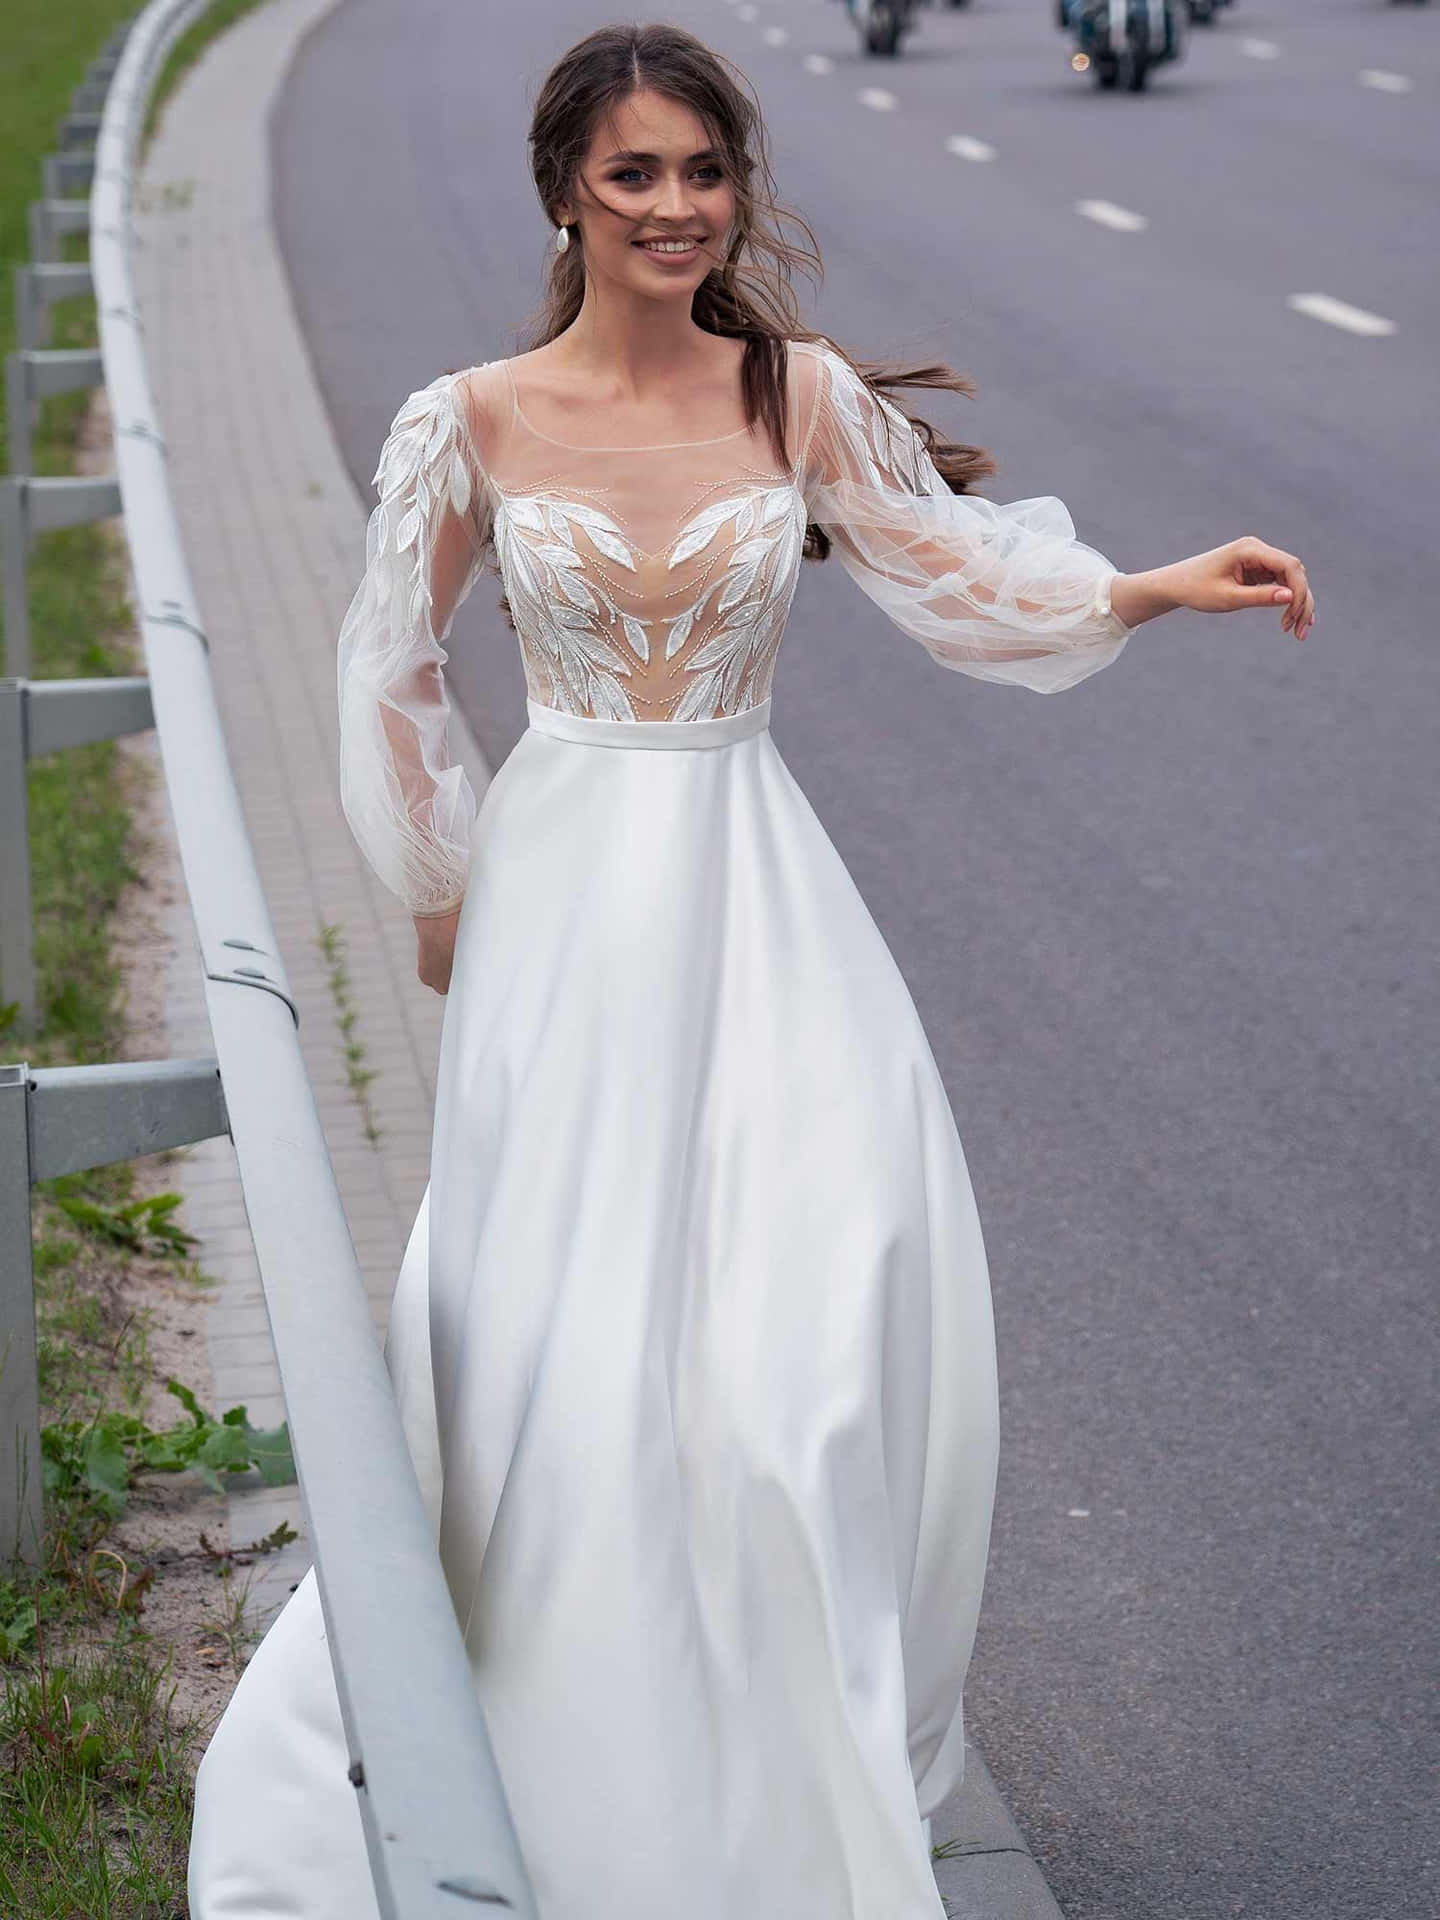 A Woman In A White Wedding Dress Is Walking Down The Road